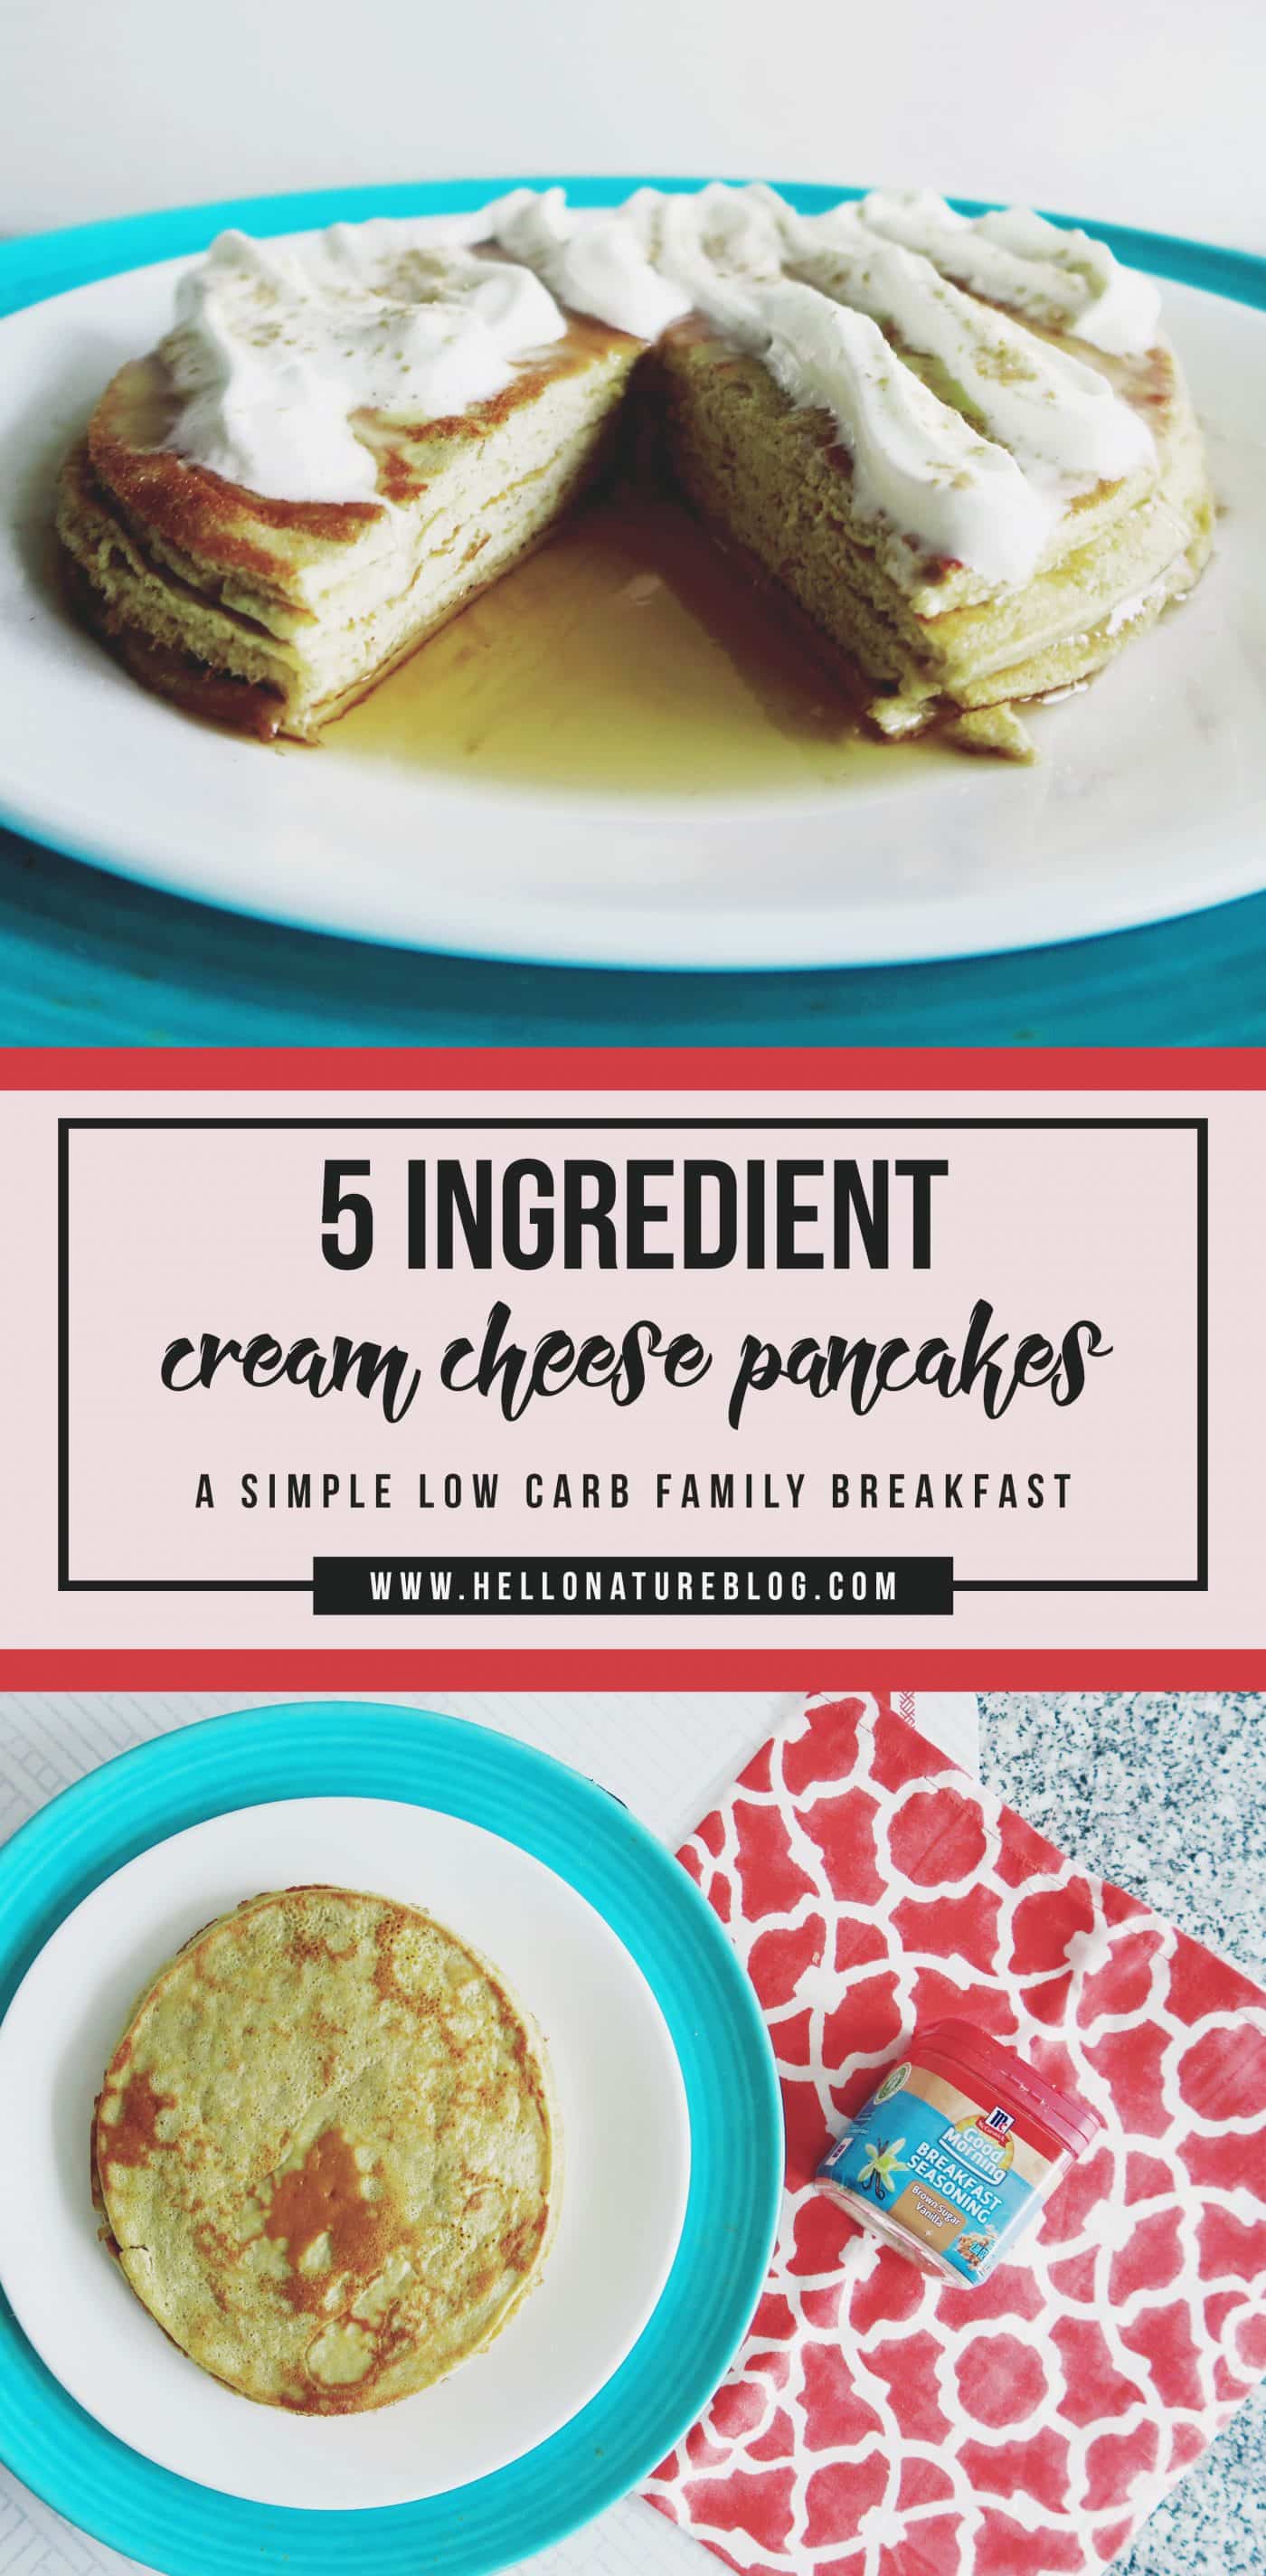 Bland breakfasts are boring. And weekday mornings go by waaaay too fast to really enjoy the meal as a family. So if you're looking for an easy weekend family breakfast, these cream cheese pancakes are a must!